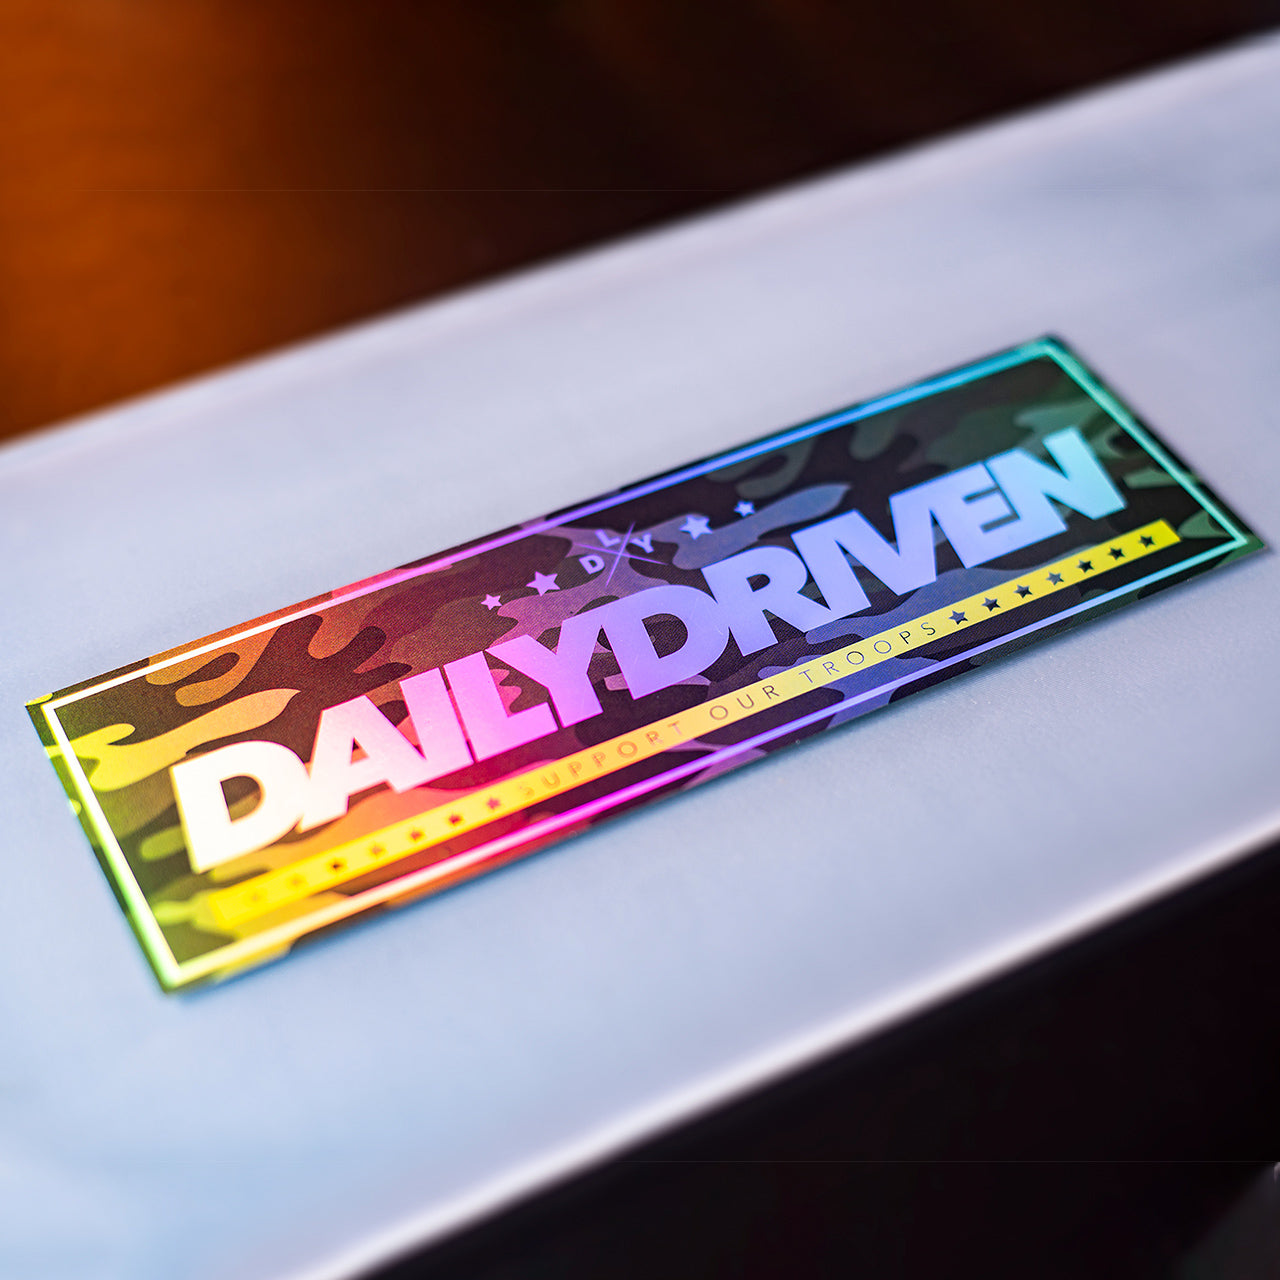 DailyDriven Support Troops Charity Sticker